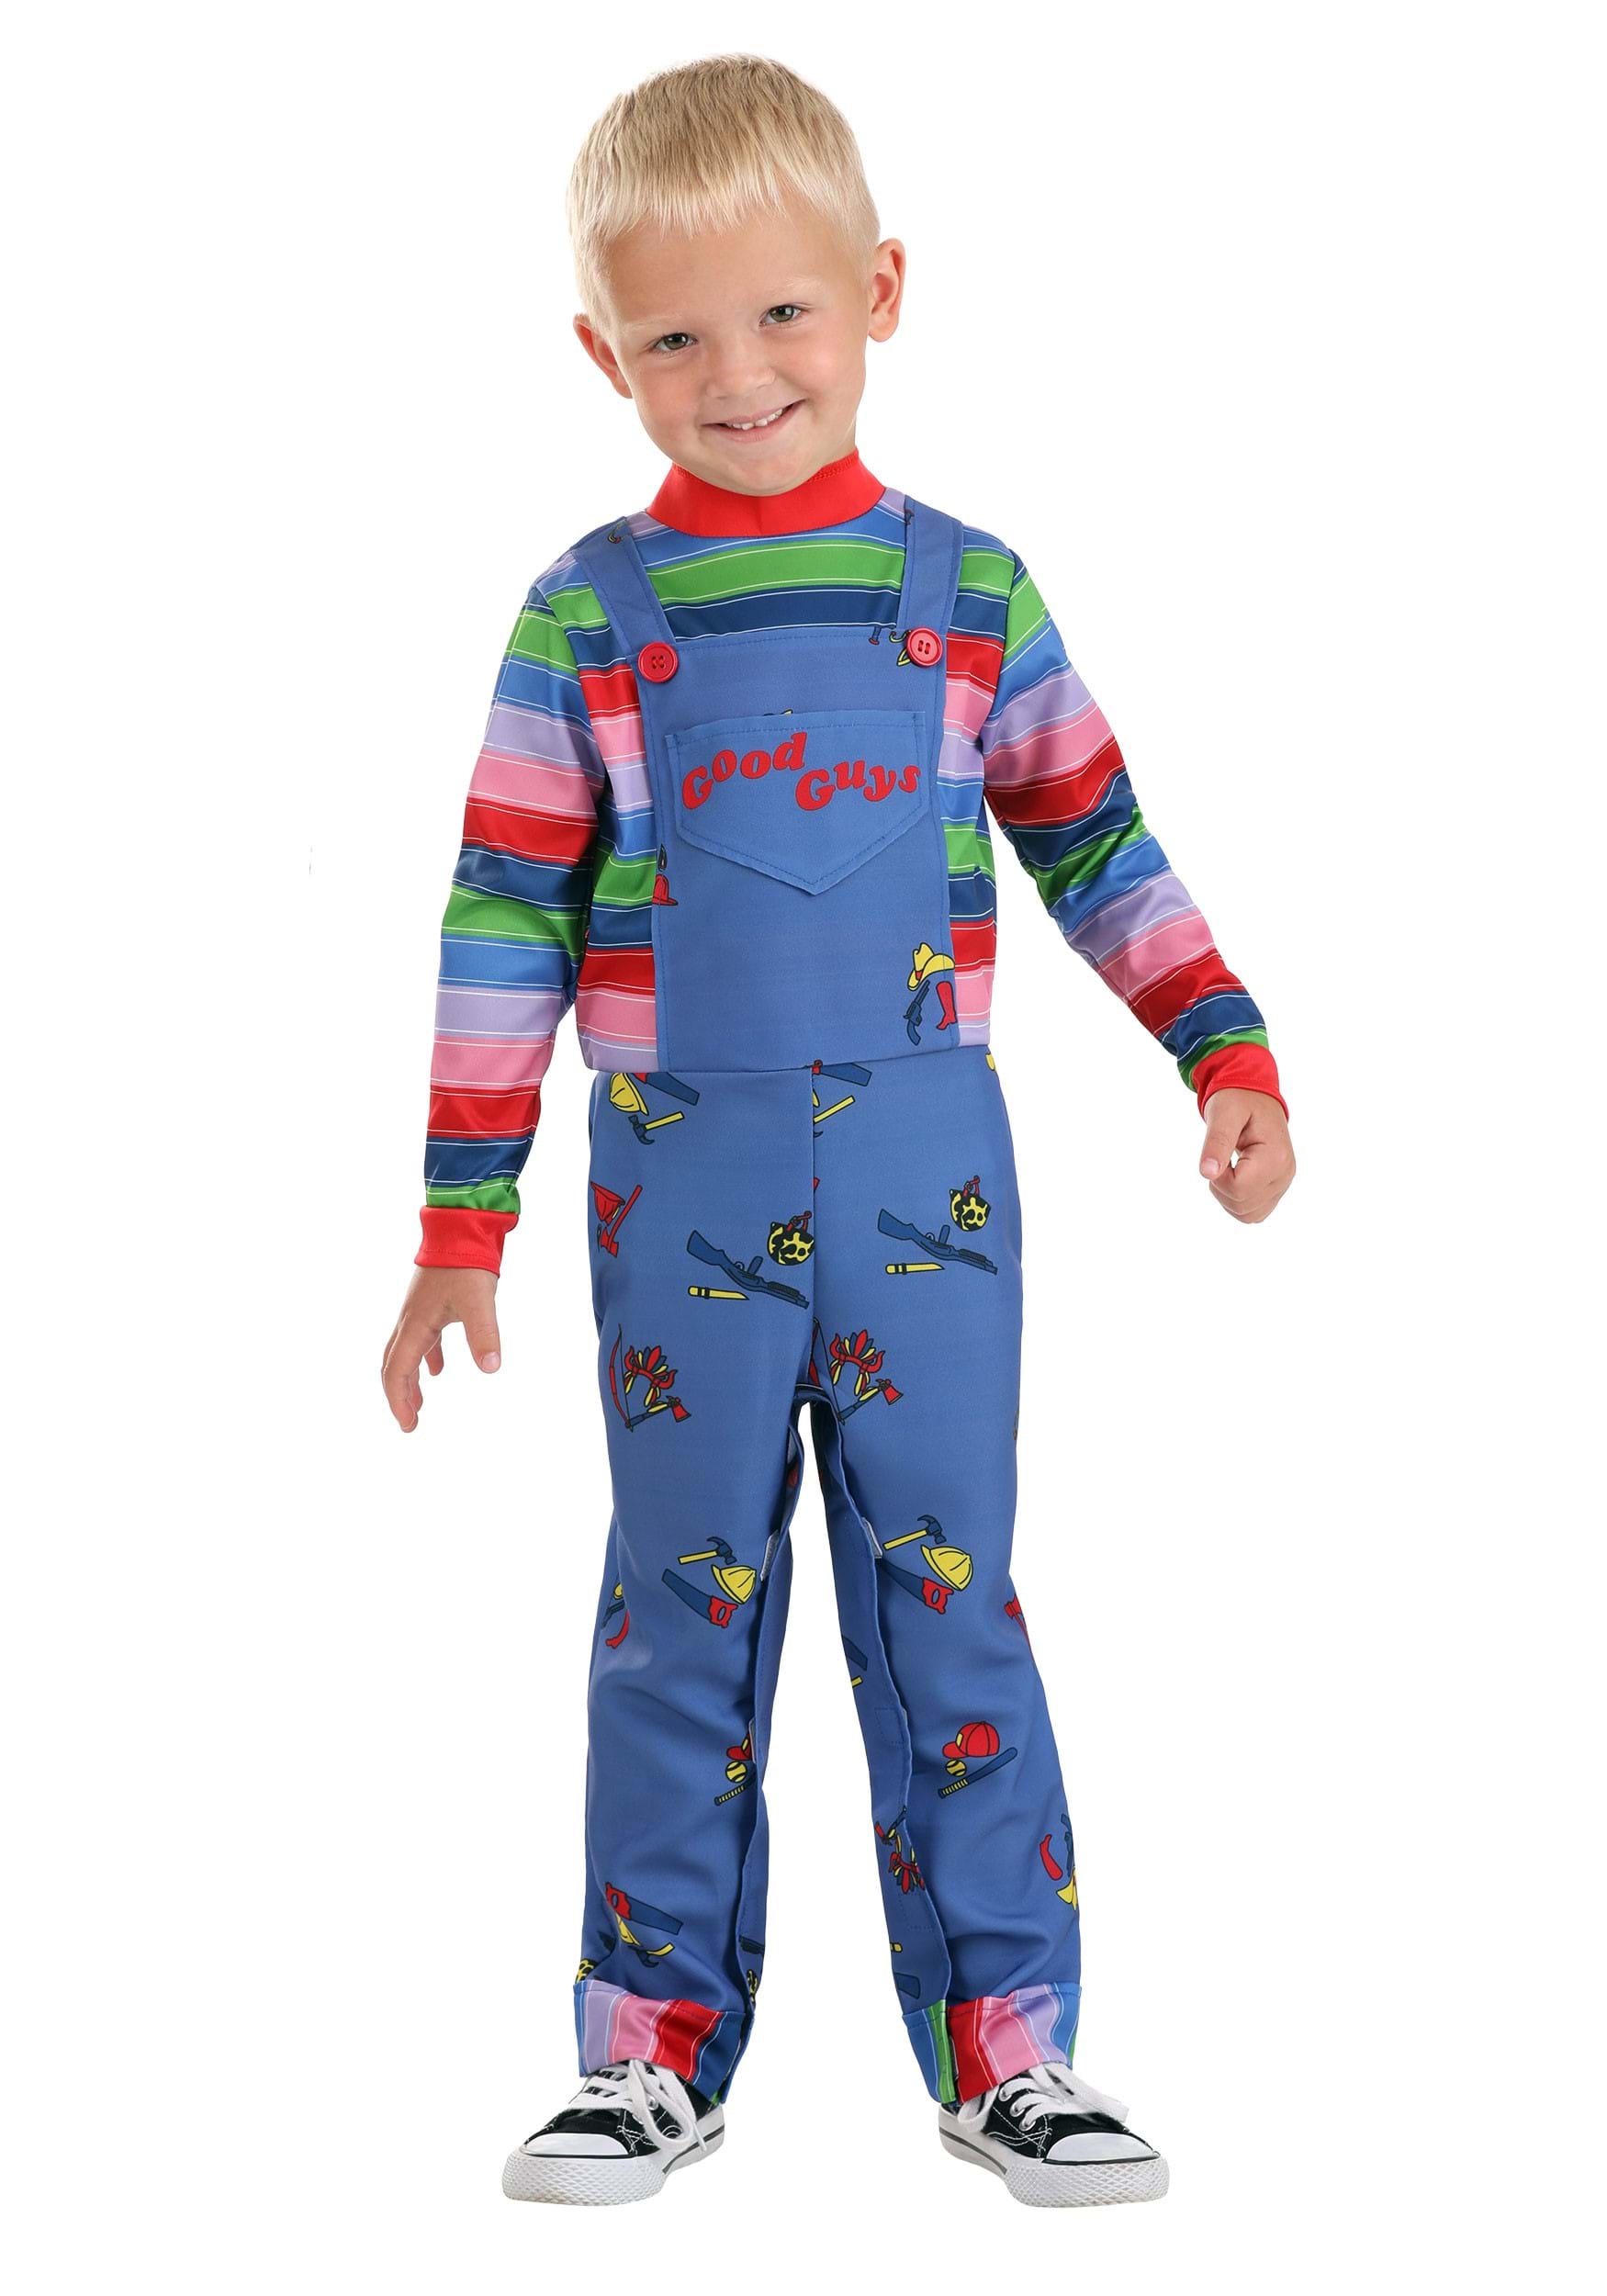 Photos - Fancy Dress Toddler Jerry Leigh Child's Play Chucky Costume for Toddlers Blue/Multi/Re 